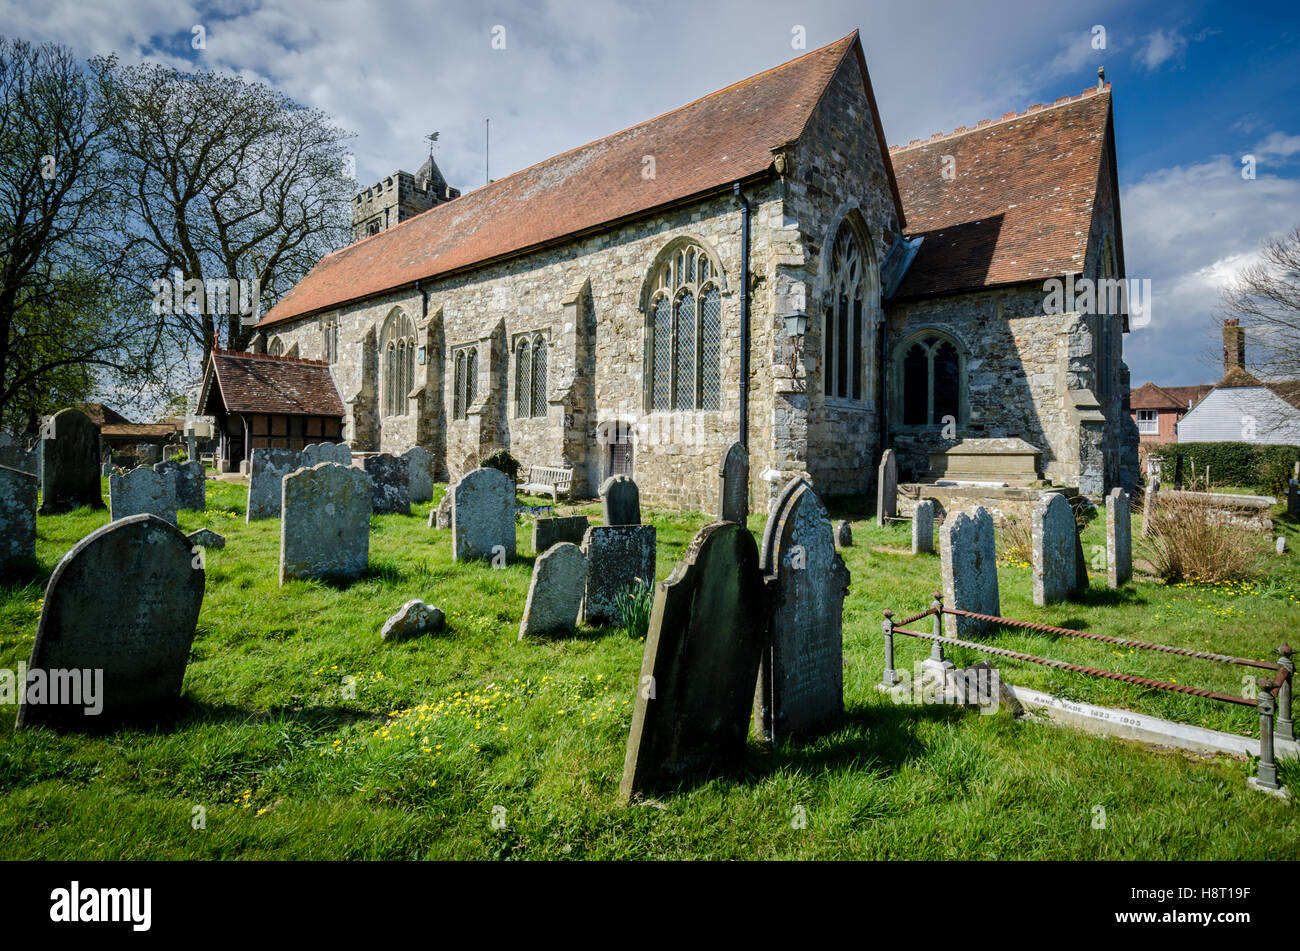 Church of St George and graveyard, Brede, Kent, UK Stock Photo